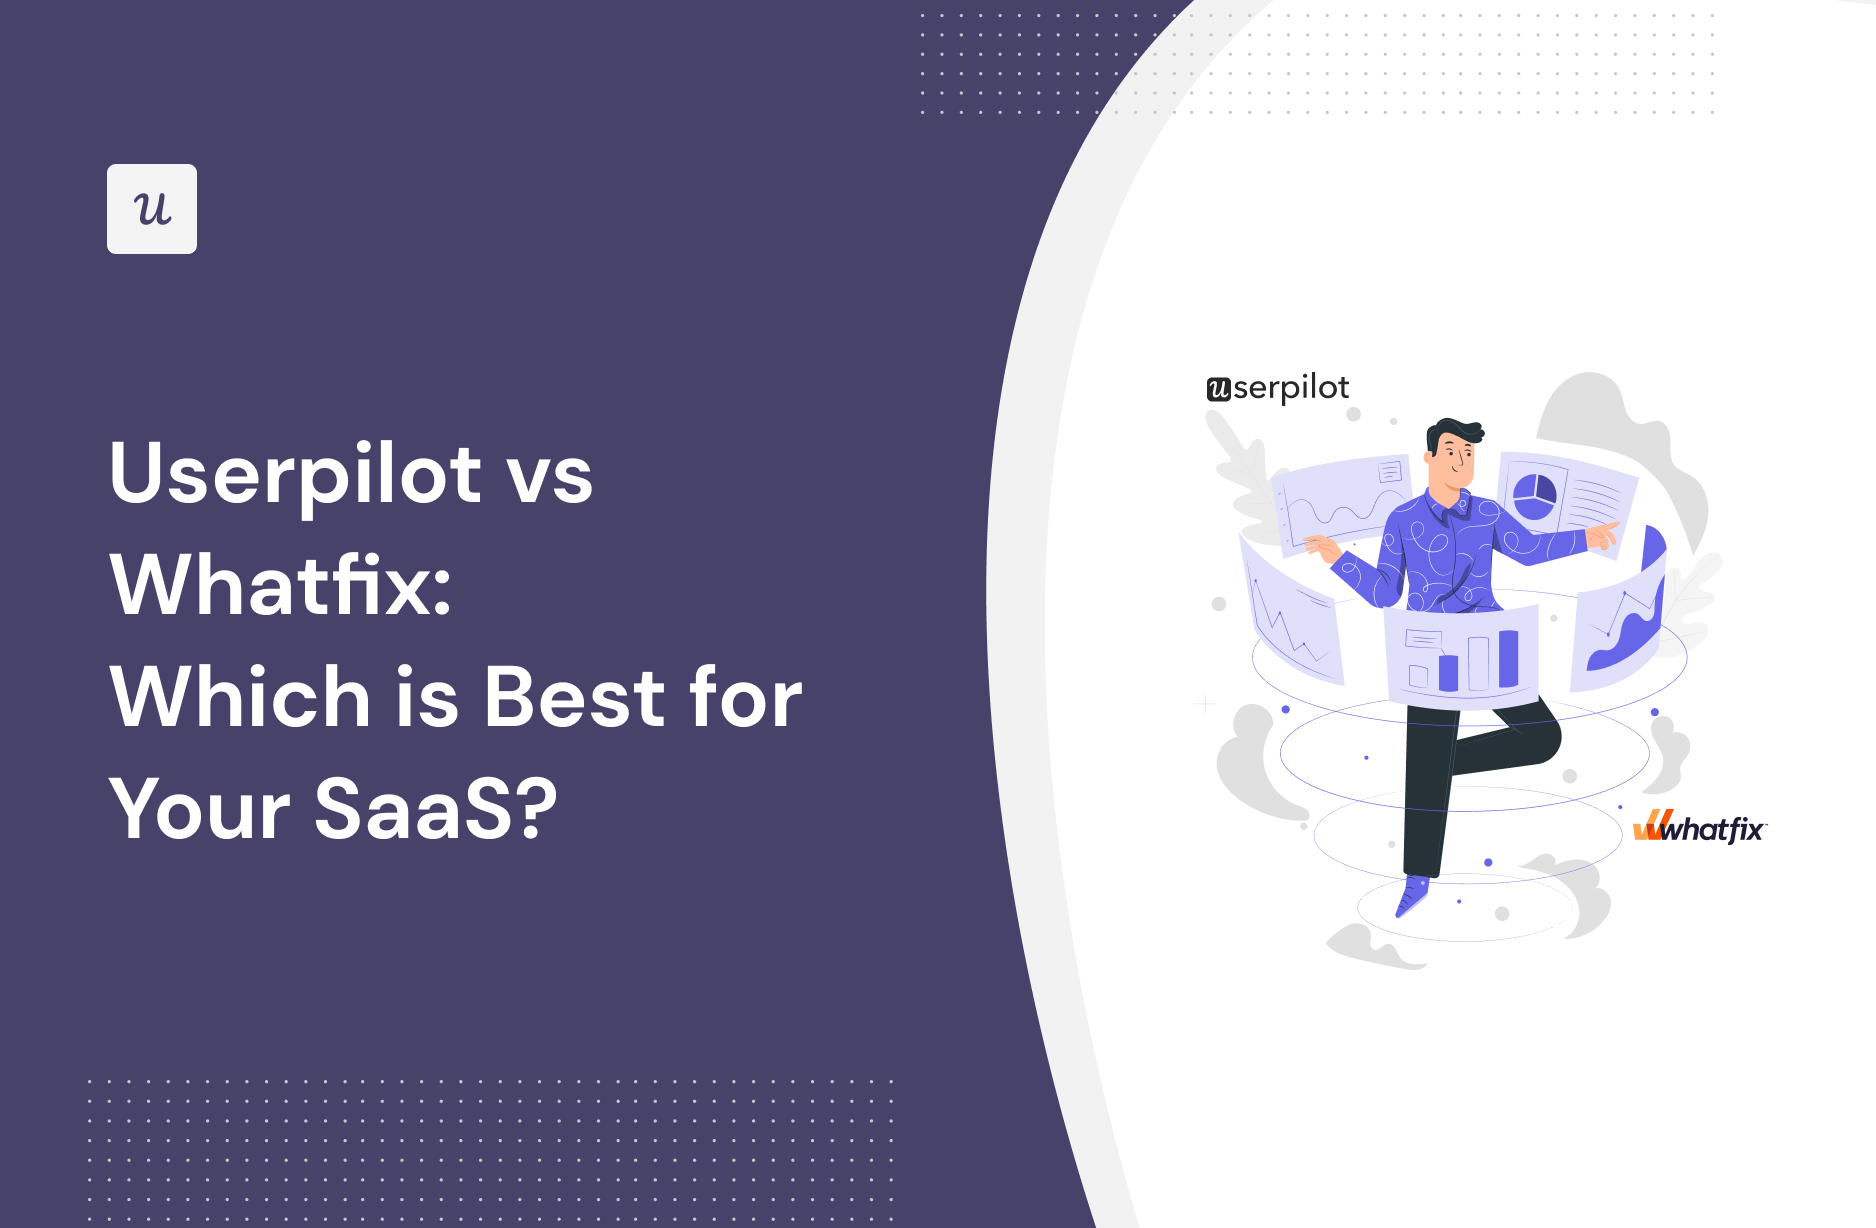 Userpilot vs Whatfix: Which Is Best for Your SaaS?